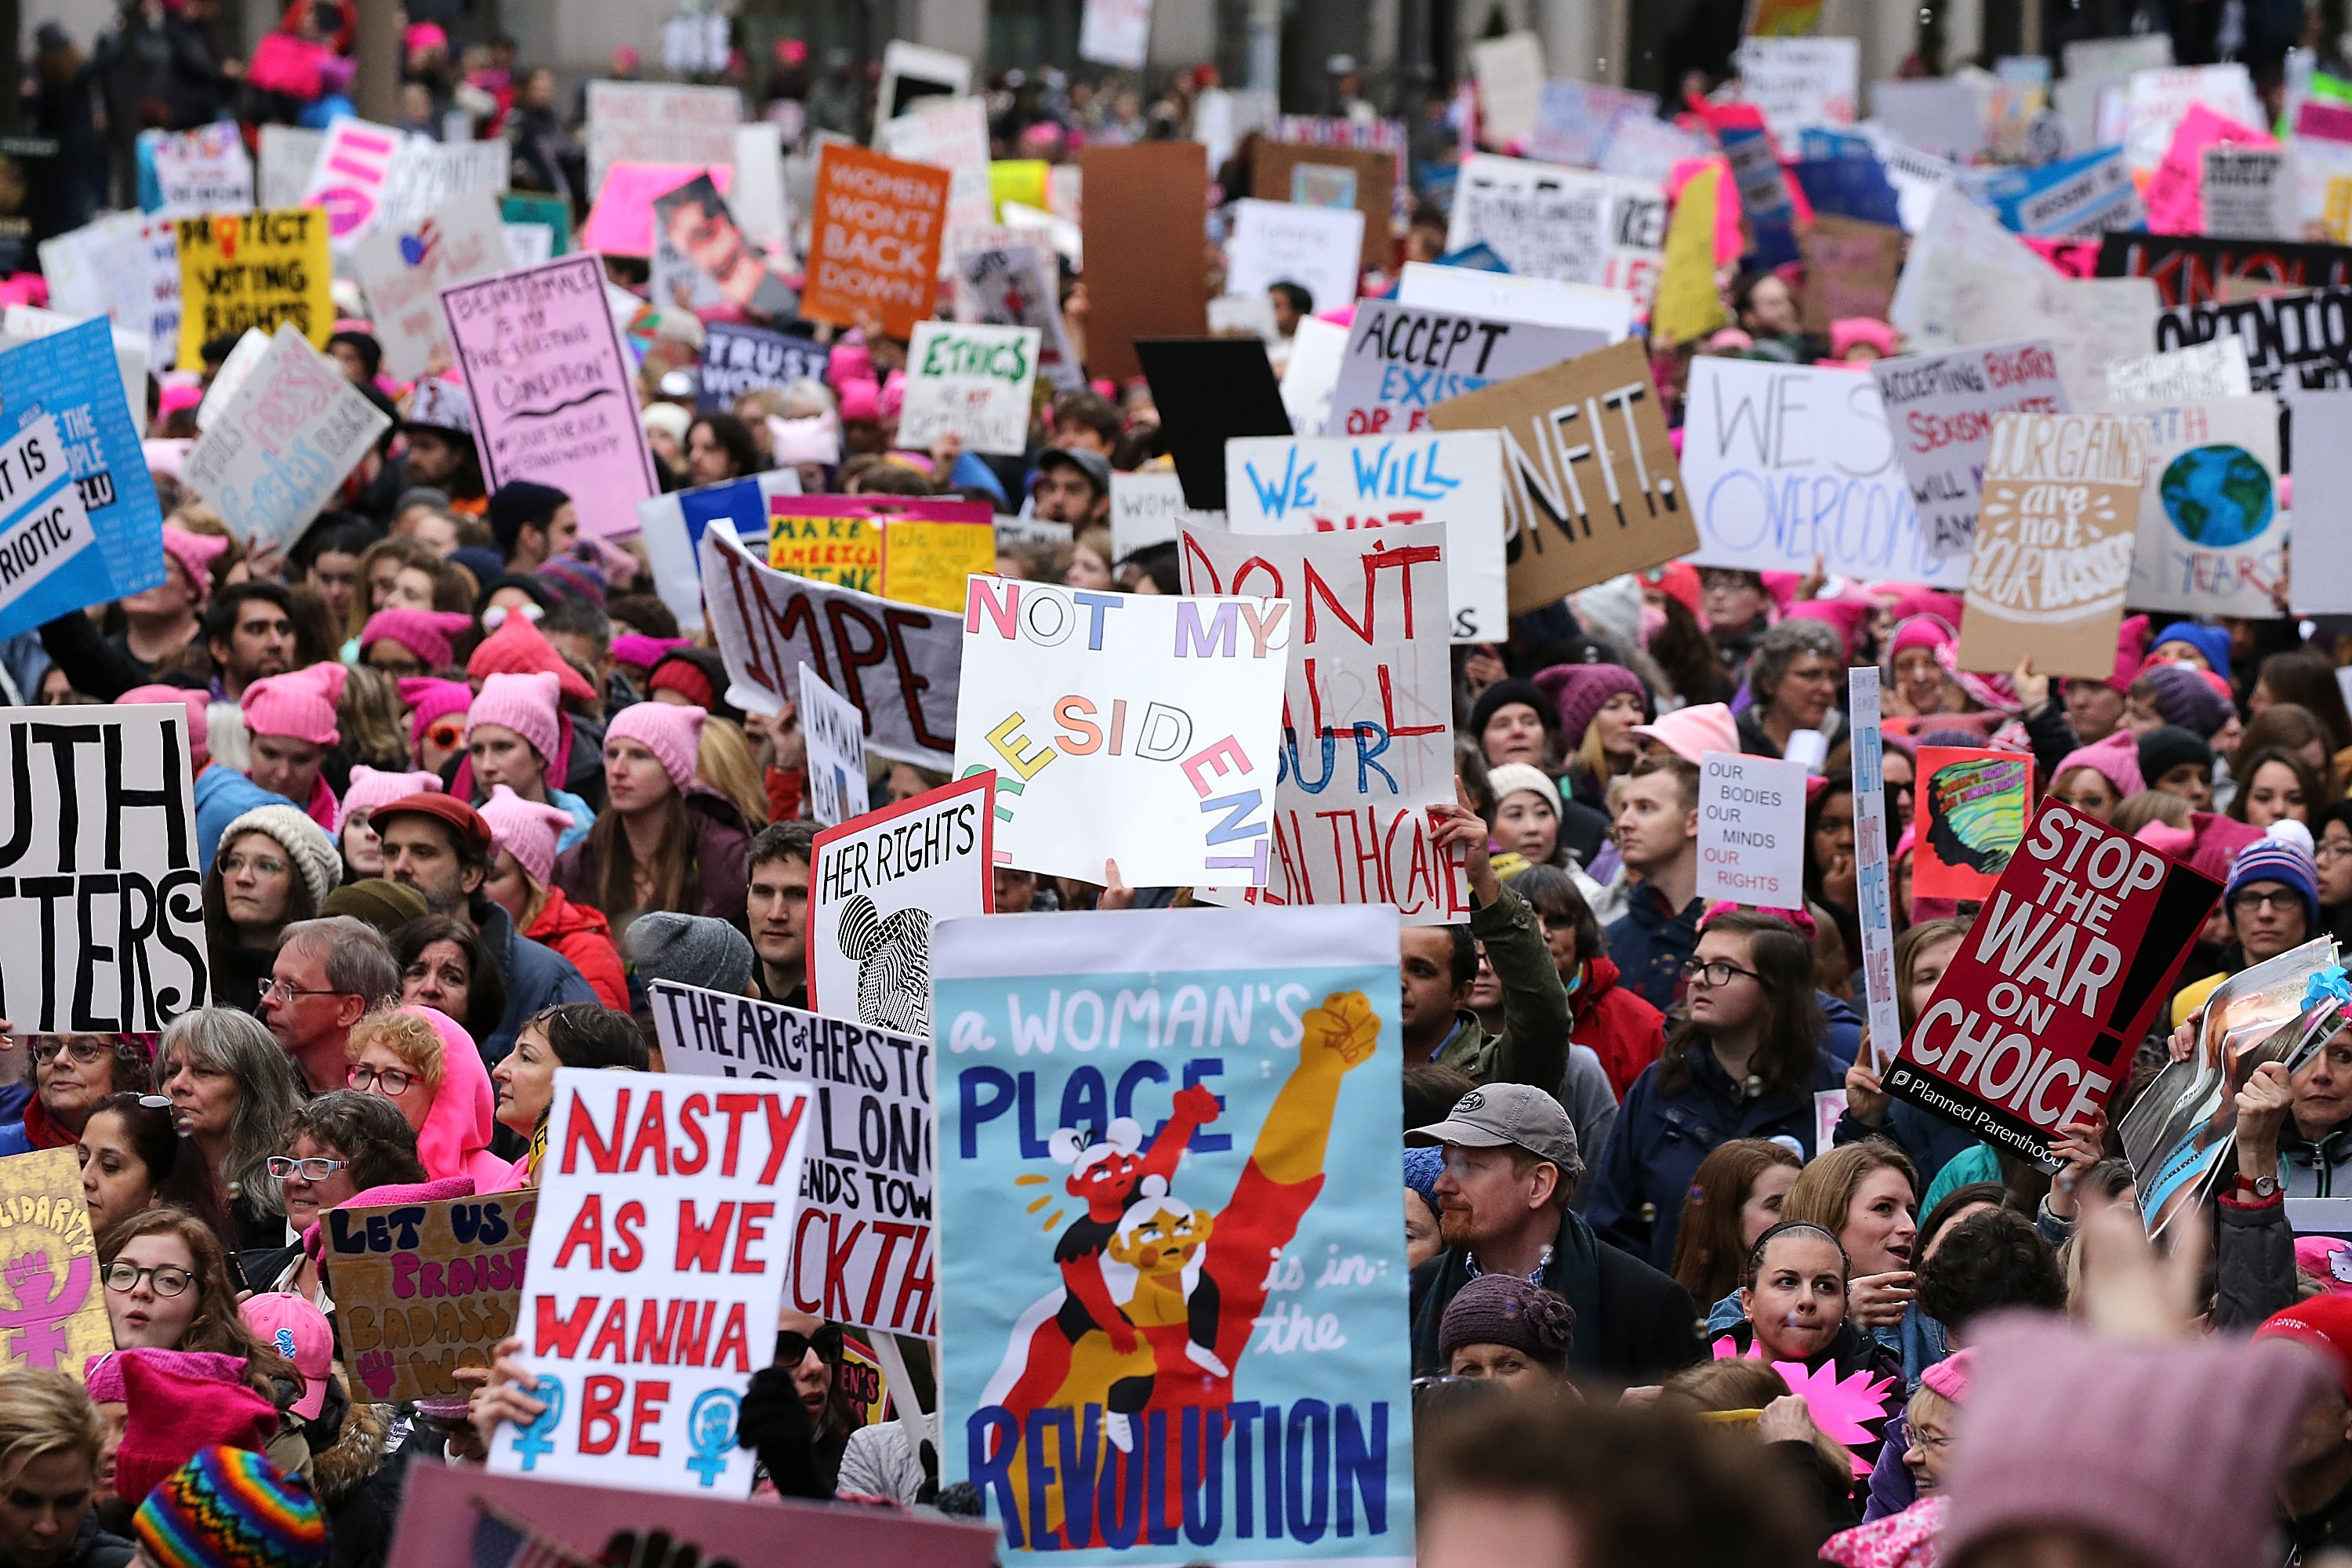 WASHINGTON, DC - JANUARY 21:  Protesters march on Pennsylvania Avenue during the Women's March on Washington on January 21, 2017 in Washington, DC.  (Photo by Paul Morigi/WireImage) (Paul Morigi—WireImage)